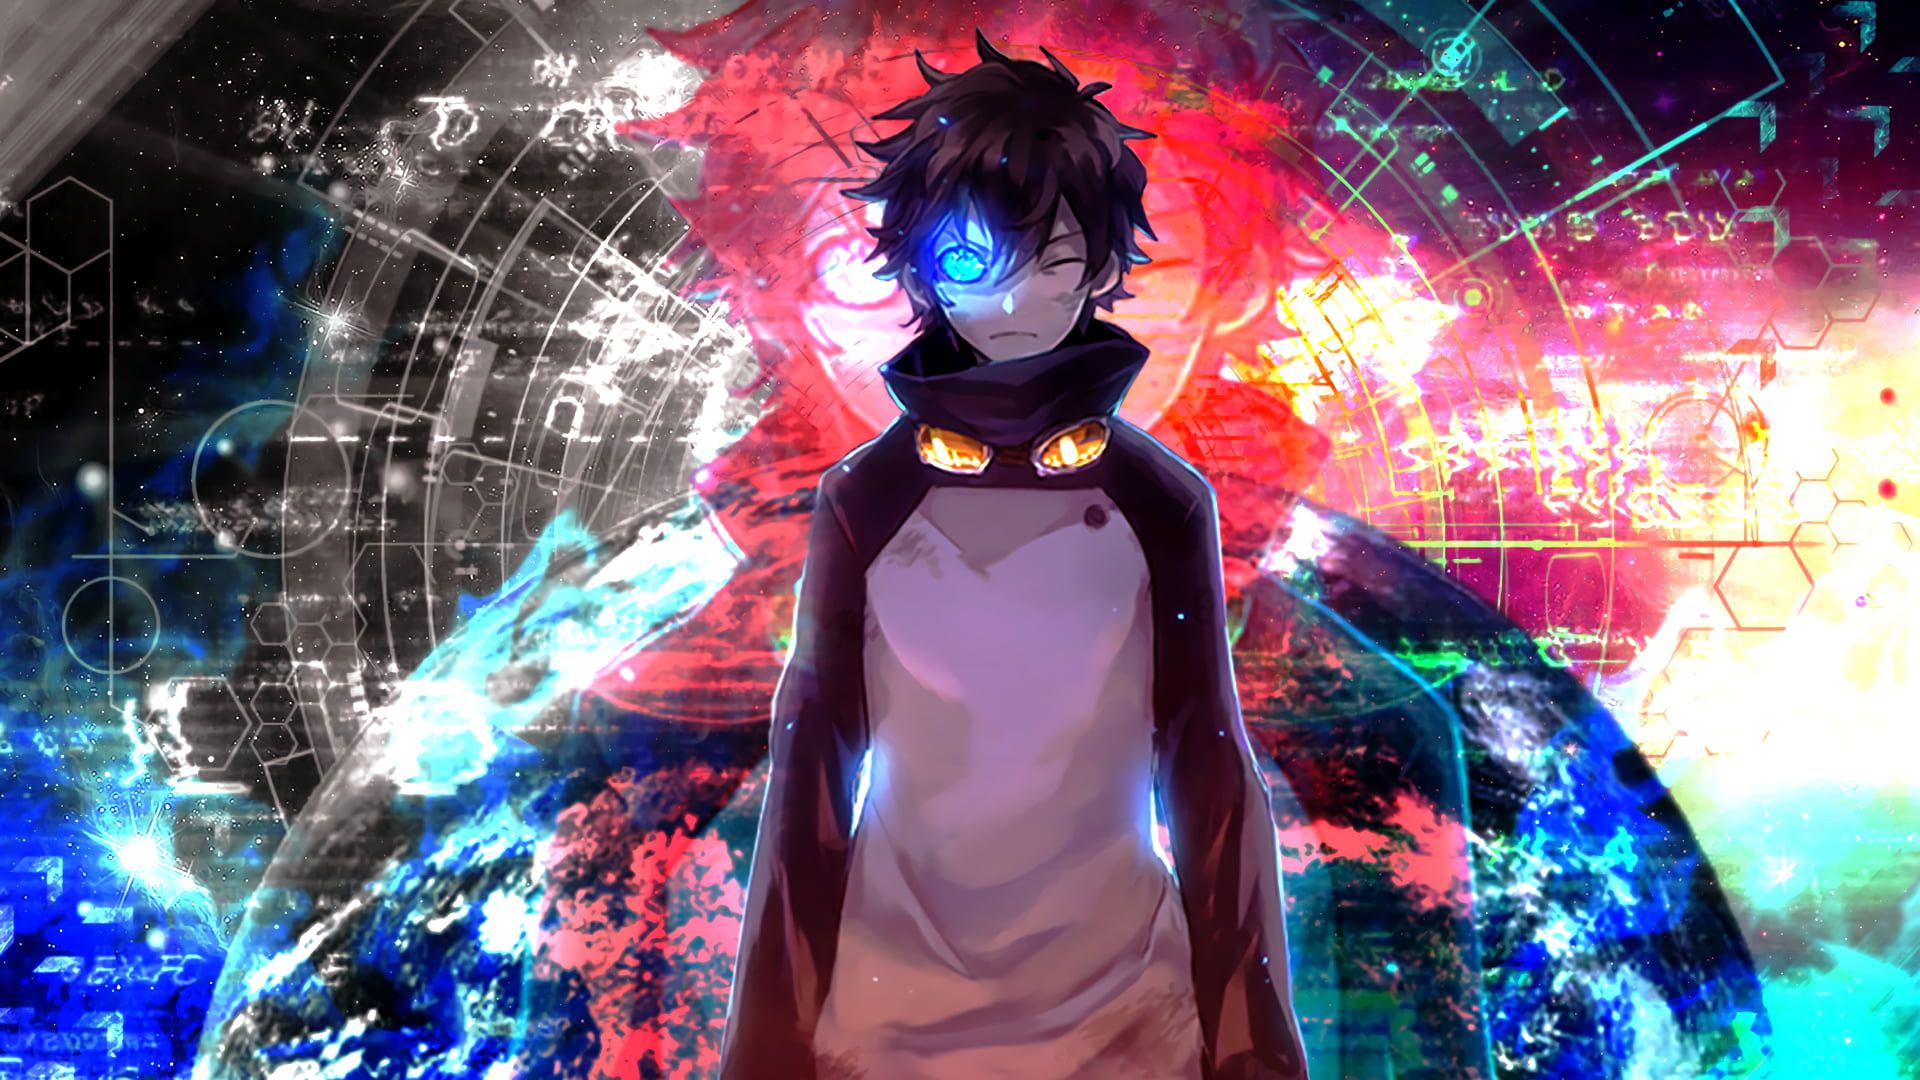 Cool Anime Character Wallpapers - Wallpaper Cave